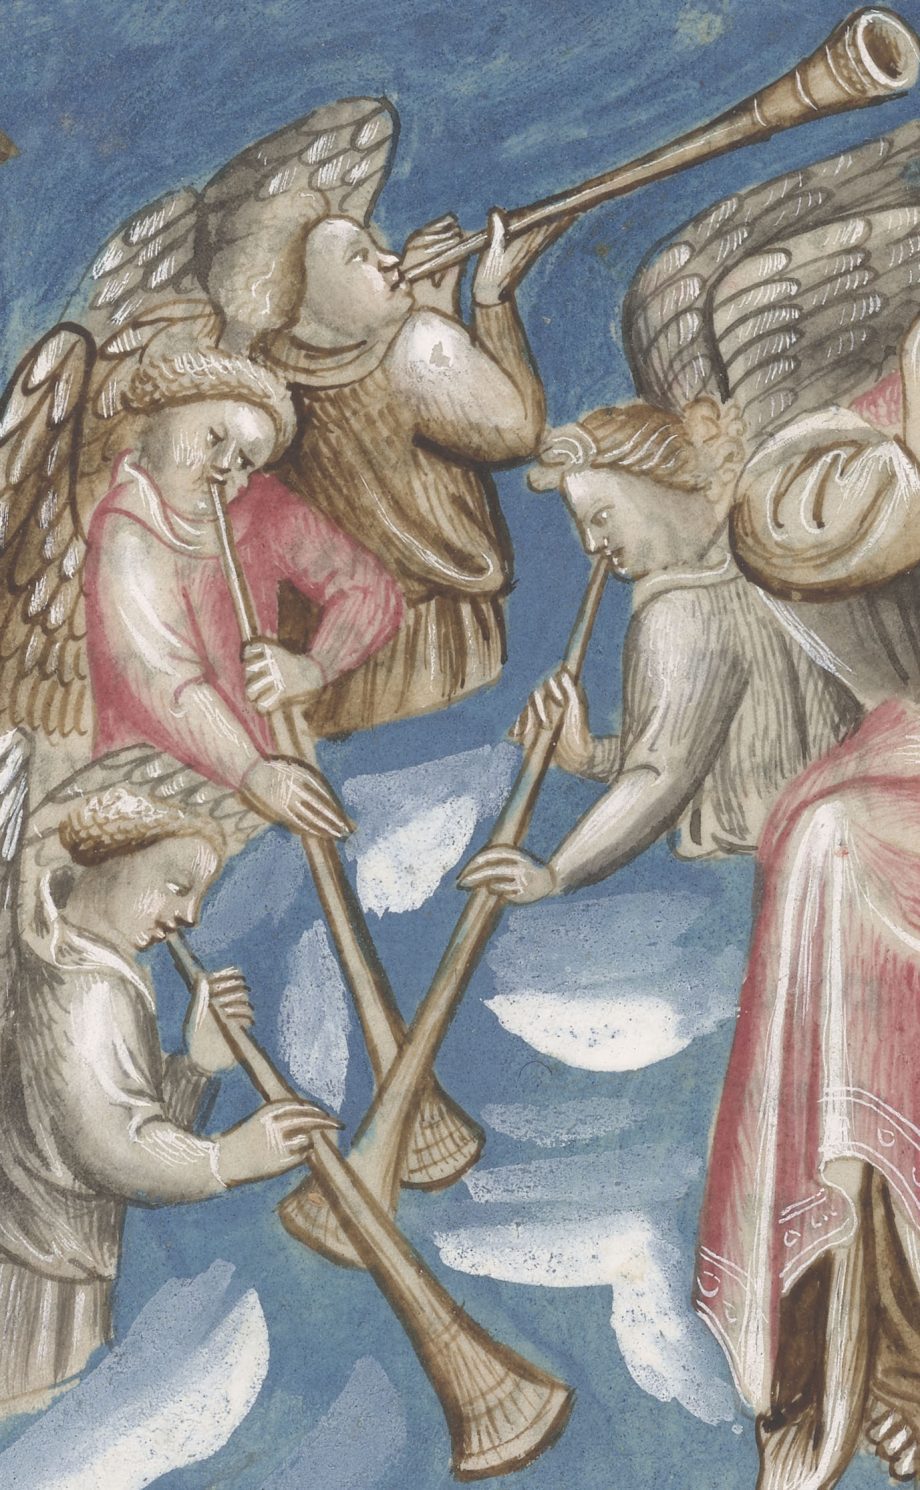 extract from the Berry Apocalypse; folio 18 verso showing archangel angels playing the trumpet